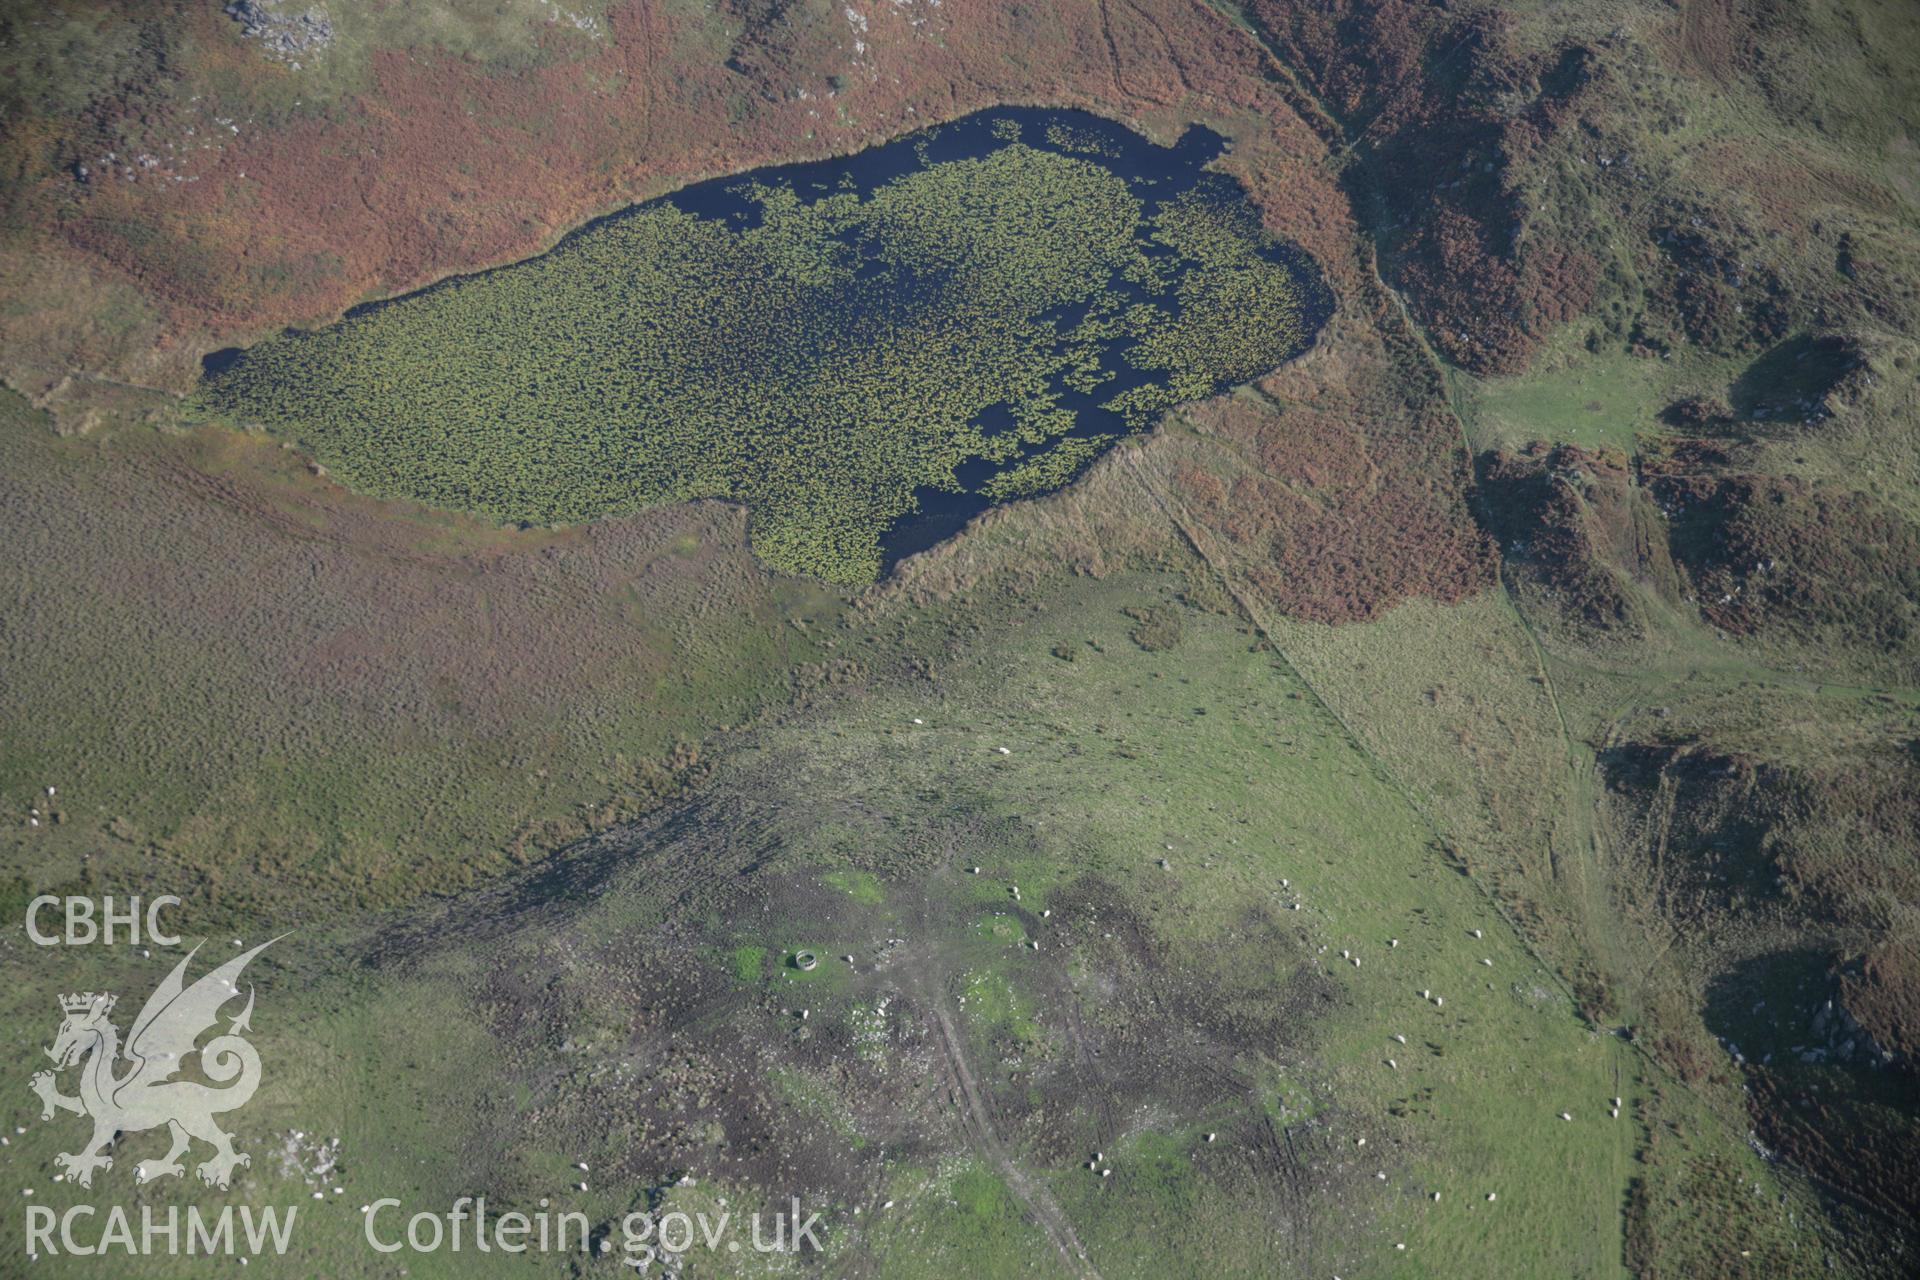 RCAHMW colour oblique aerial photograph of Llyn Barfog (the Bearded Lake), Mynydd y Llyn with cairn viewed from the north-west. Taken on 17 October 2005 by Toby Driver